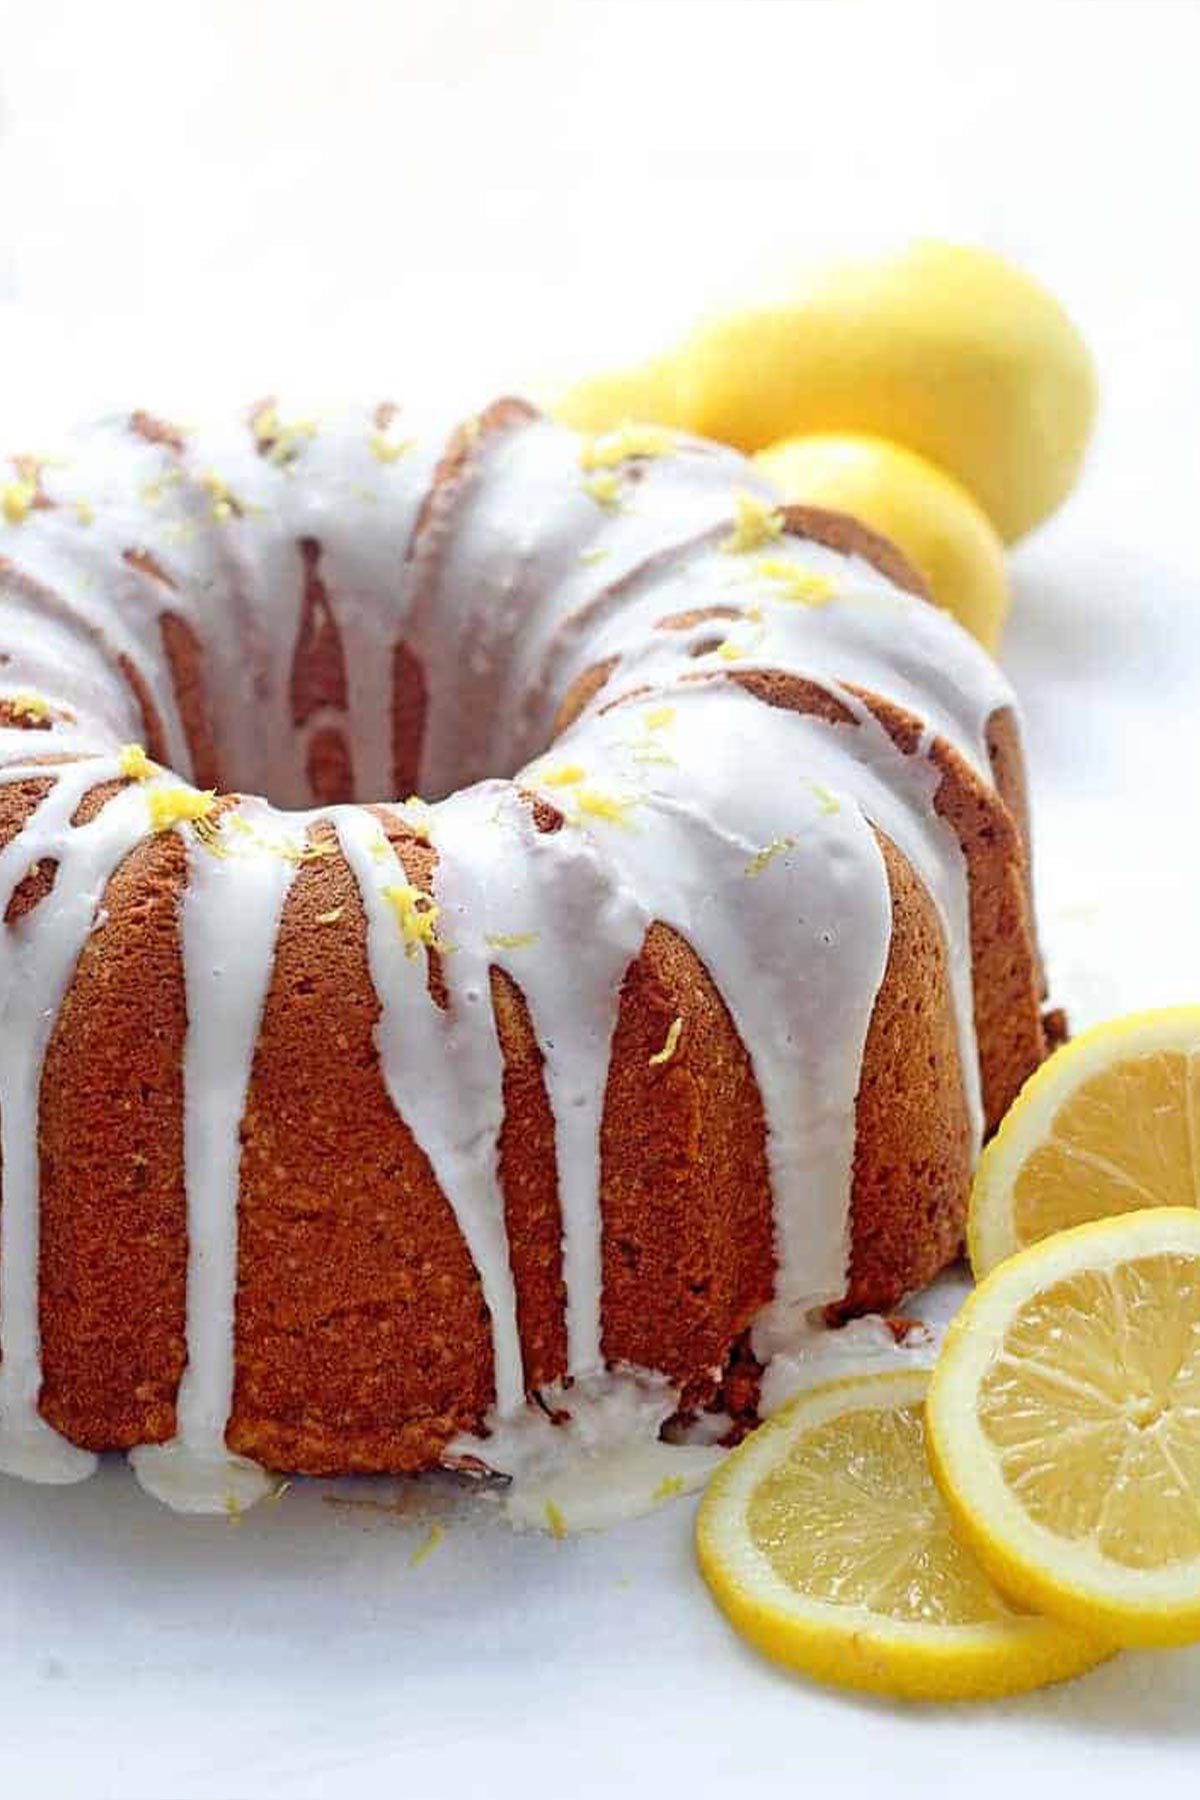 A lemon pound cake on the table with glaze and fresh slices of lemon.